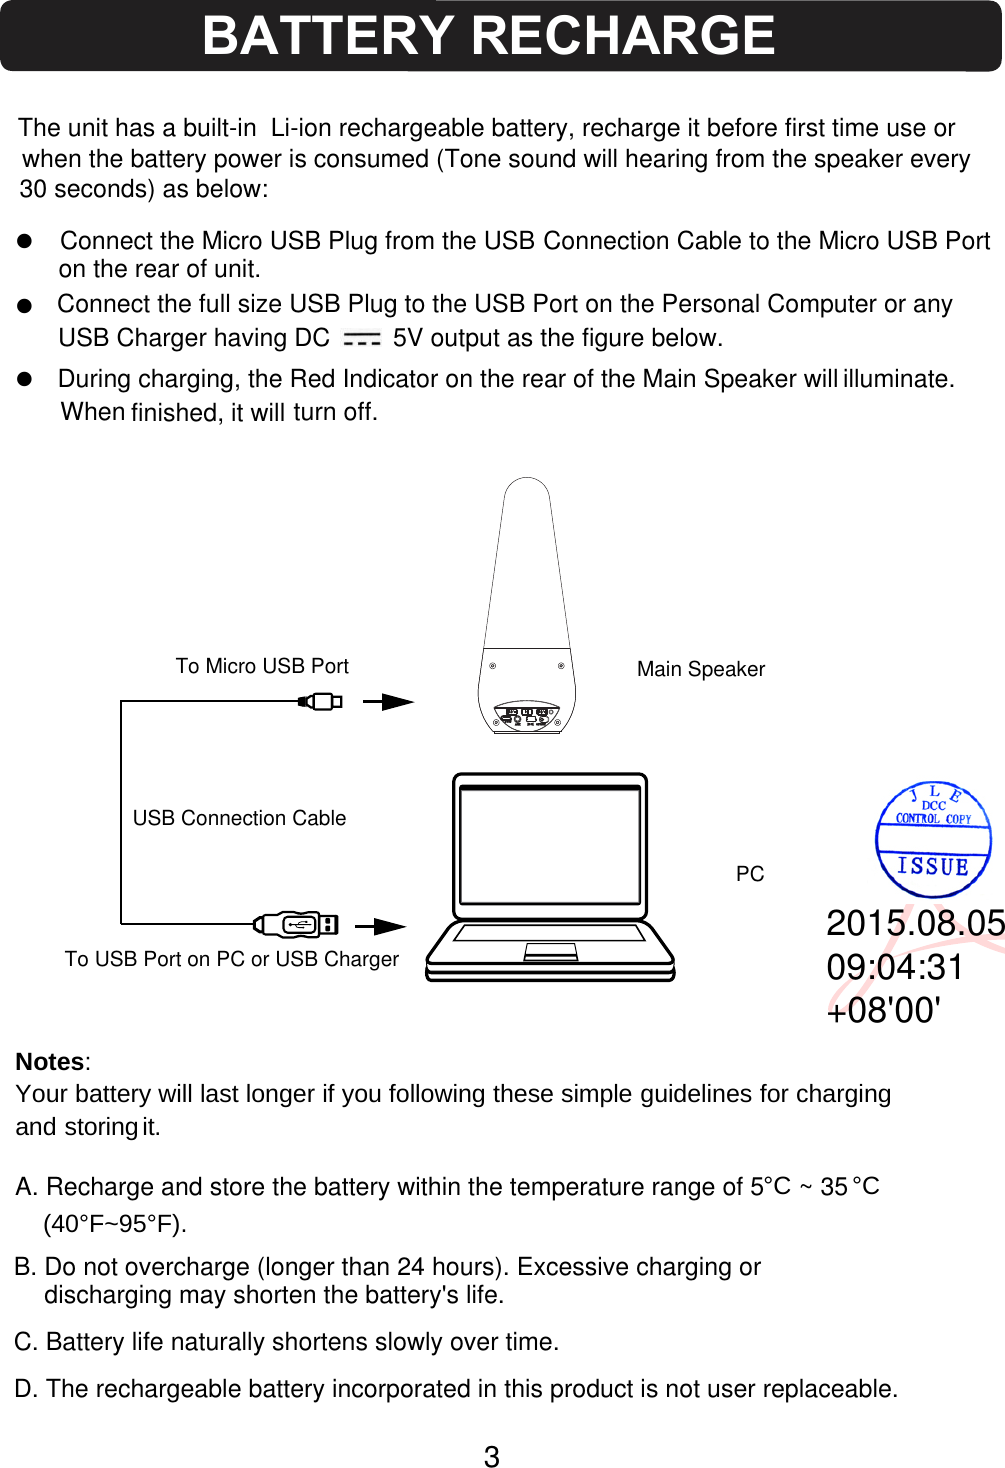 zzNotes:Your battery will last longer if you follo(40°F~95°F).wing these simple guidelines for chargingand storing it.on the rear of unit.DC5VAUX OFF/O NPCUSB Charger having DC         5V output as the figure below.turn off.To Micro USB Portfinished, it will z3The unit has a built-in  Li-ion rechargeable battery, recharge it before first time use or when the battery power is consumed (Tone sound will hearing from the speaker every  30 seconds) as below:Connect the Micro USB Plug from the USB Connection Cable to the Micro USB Port Connect the full size USB Plug to the USB Port on the Personal Computer or any During charging, the Red Indicator on the rear of the Main Speaker willUSB Connection CableMain SpeakerTo USB Port on PC or USB ChargerA. Recharge and store the battery within the temperature range of 5     ~ 35 °C°CB. Do not overcharge (longer than 24 hours). Excessive charging or discharging may shorten the battery&apos;s life.C. Battery life naturally shortens slowly over time.D. The rechargeable battery incorporated in this product is not user replaceable.BATTERY RECHARGE illuminate. When 2015.08.0509:04:31+08&apos;00&apos;